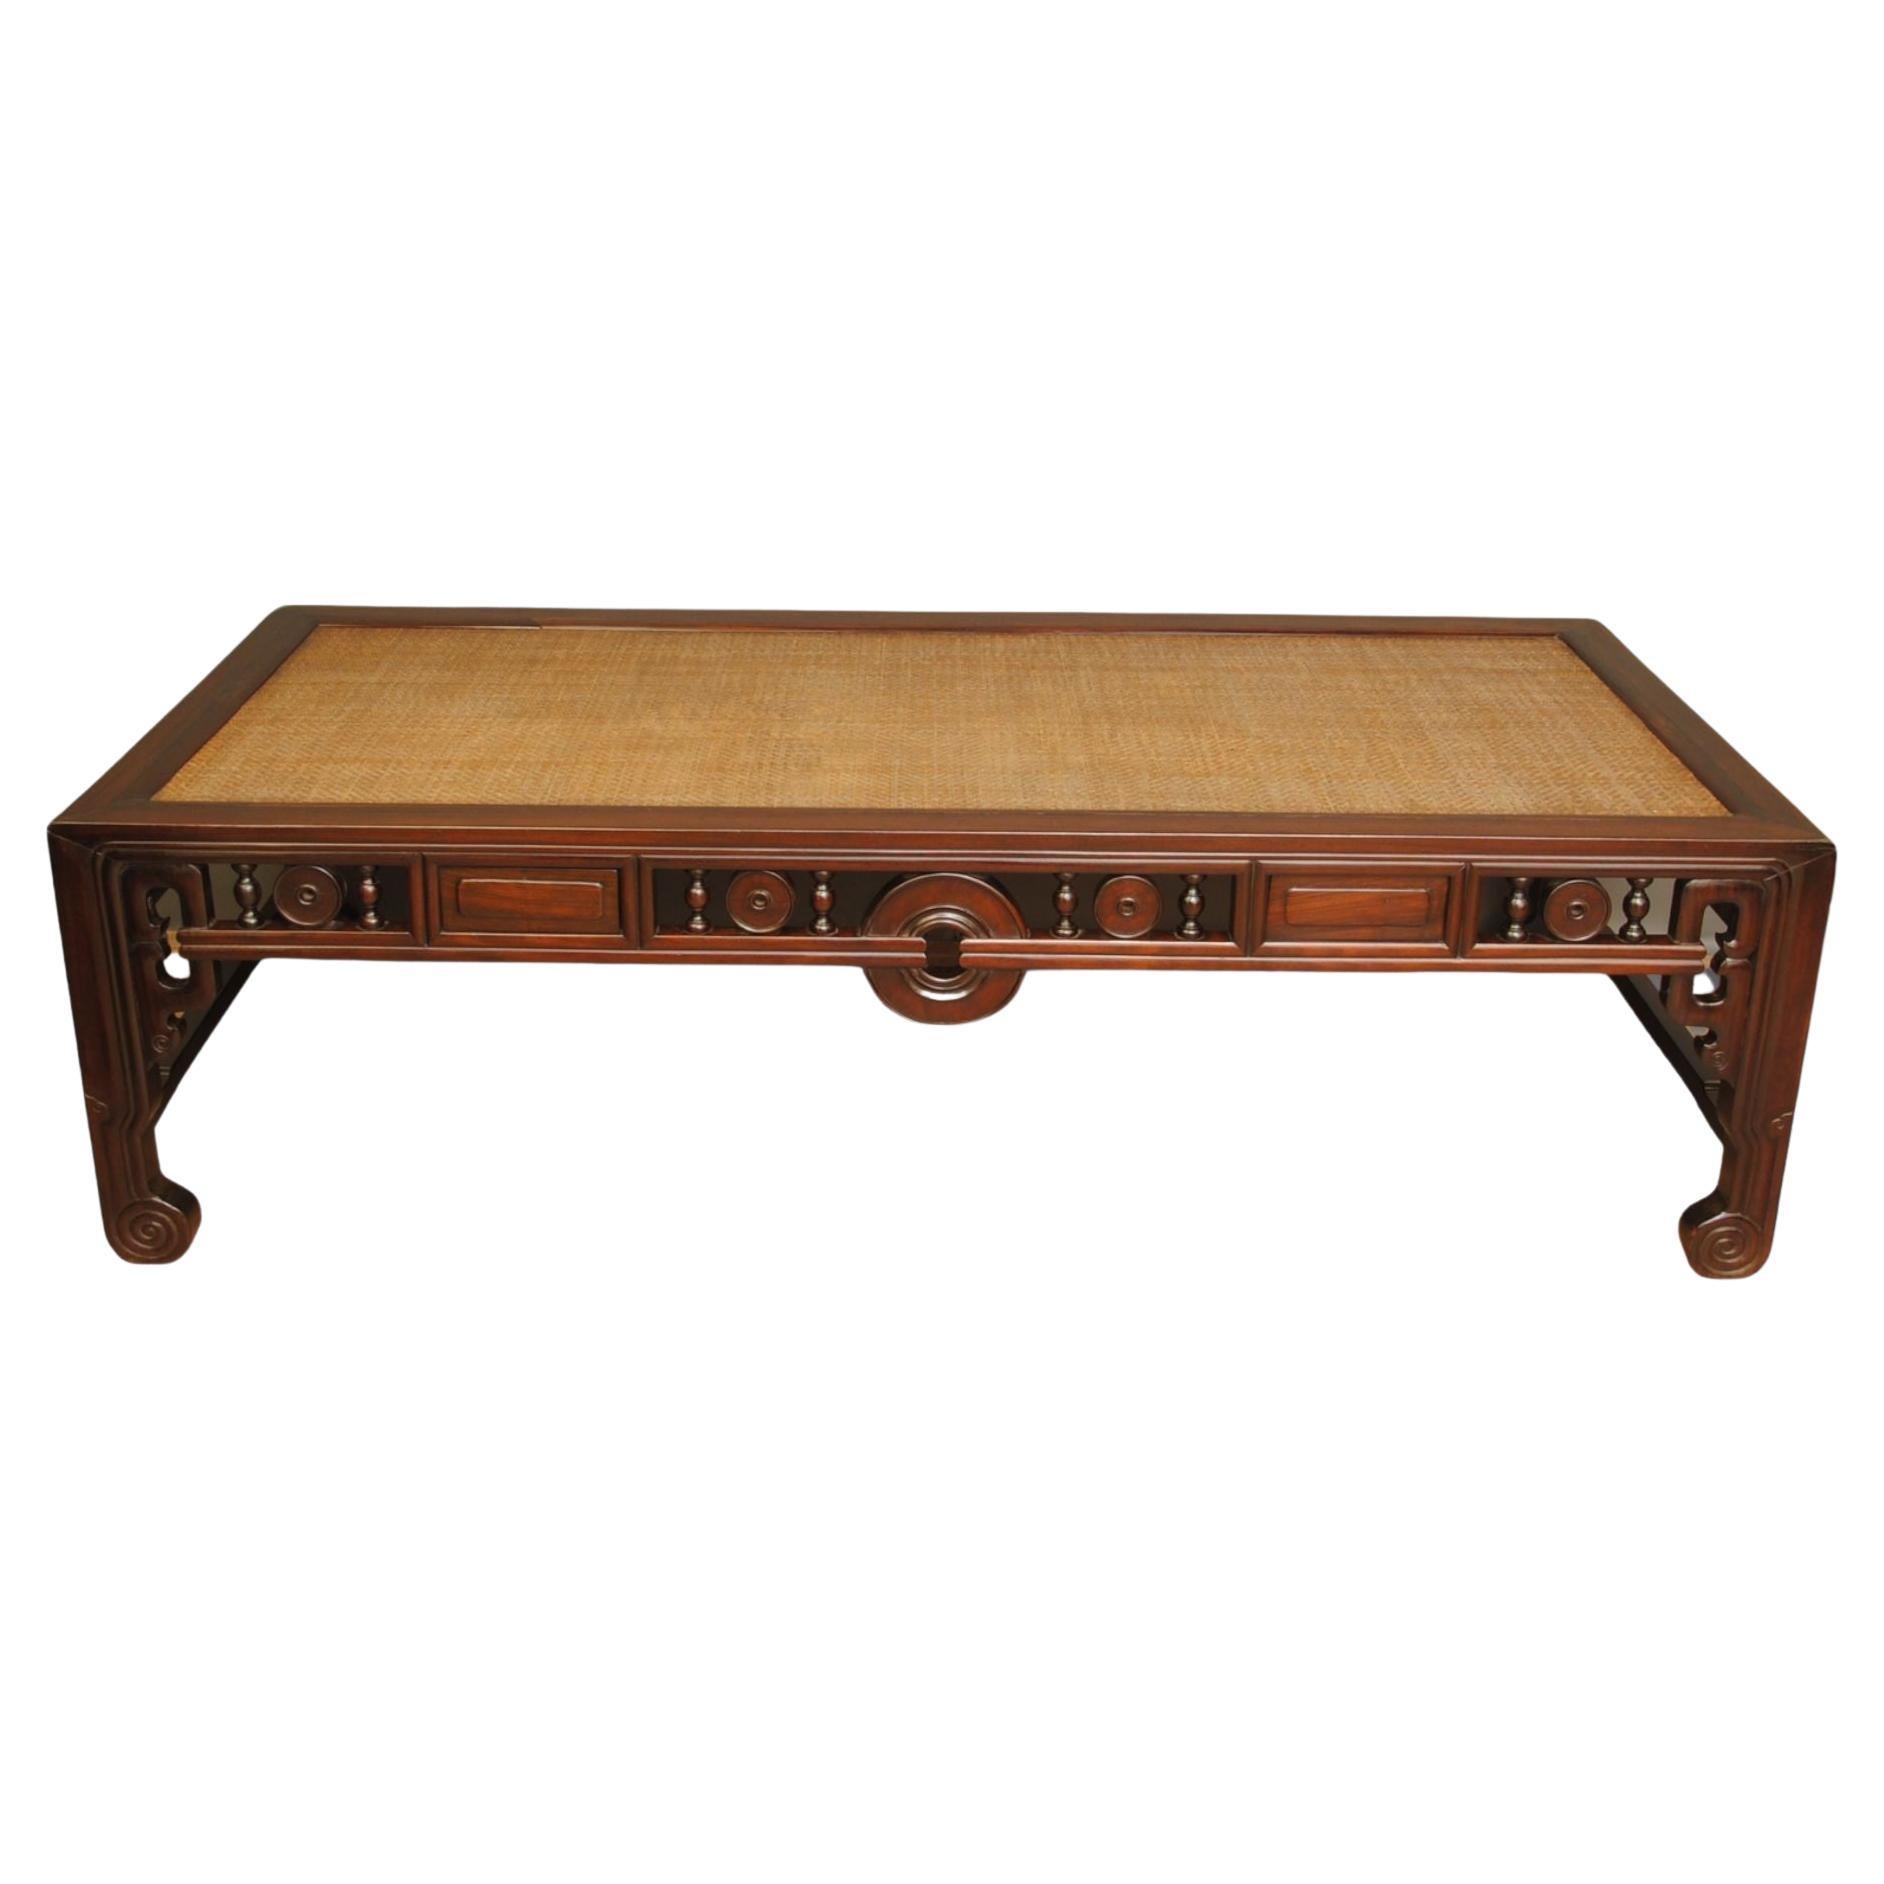 Chinese Hardwood Table Or Daybed For Sale